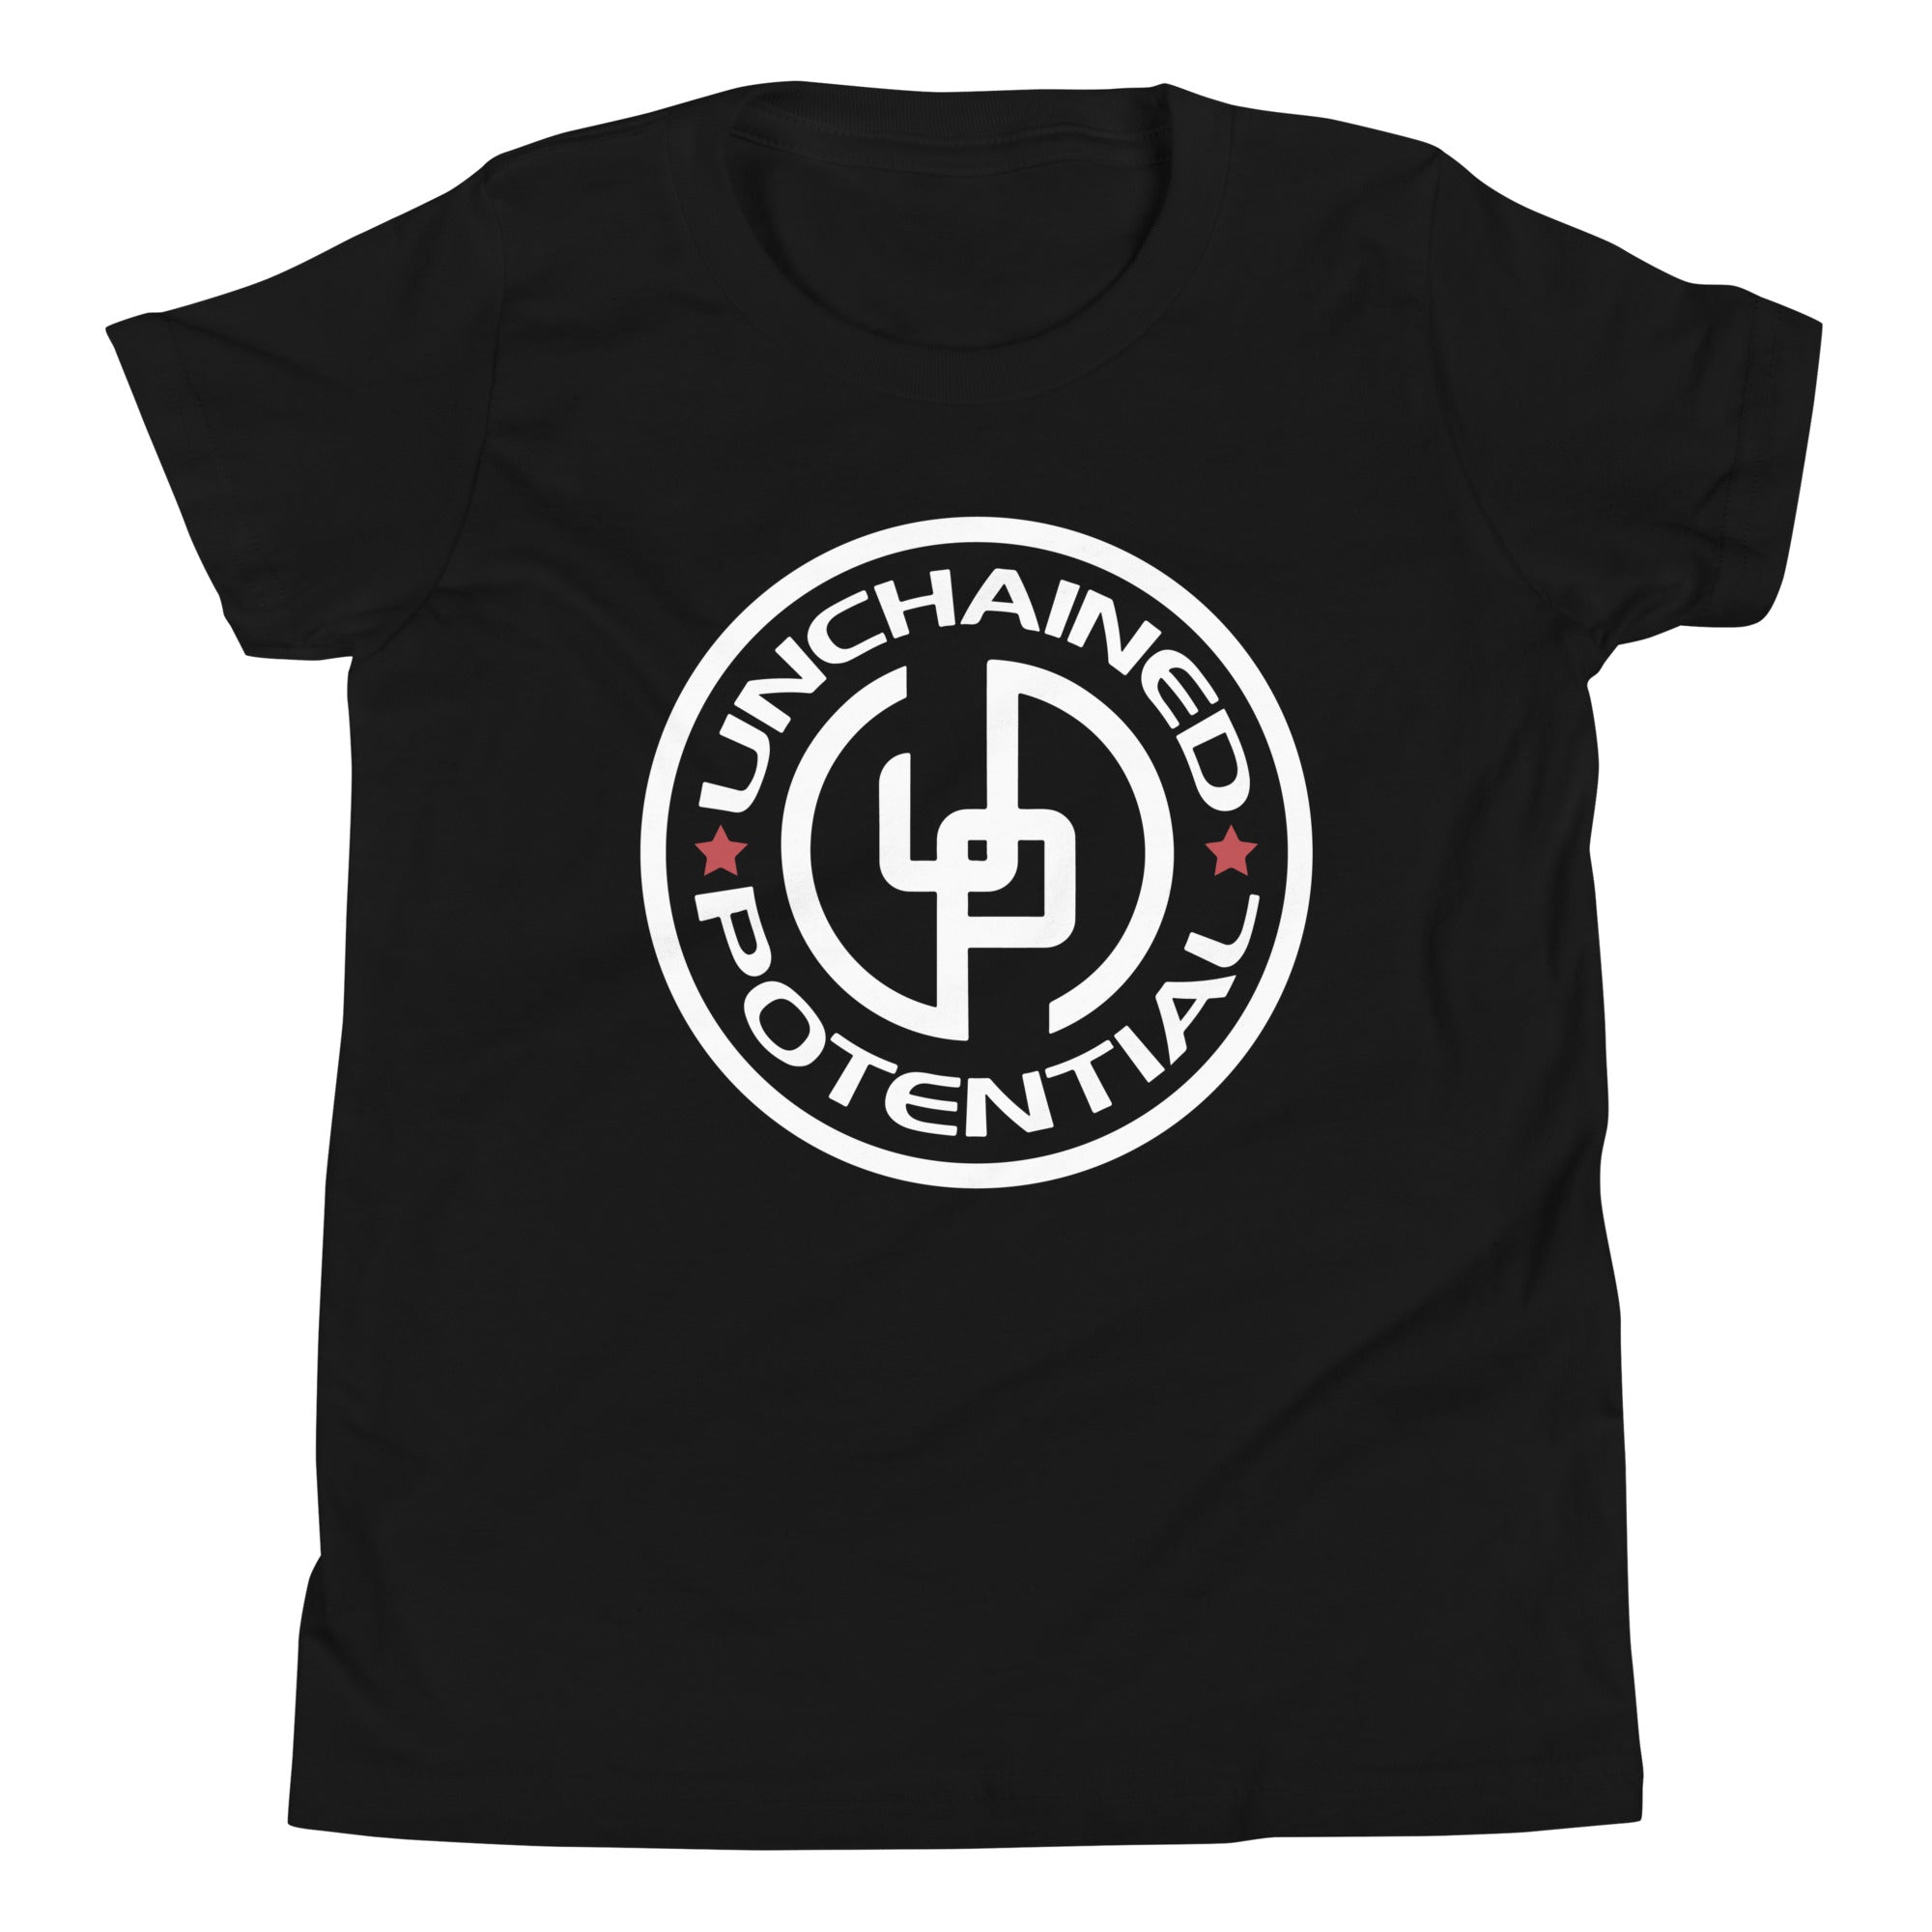 Unchained Potential Youth Short Sleeve T-Shirt